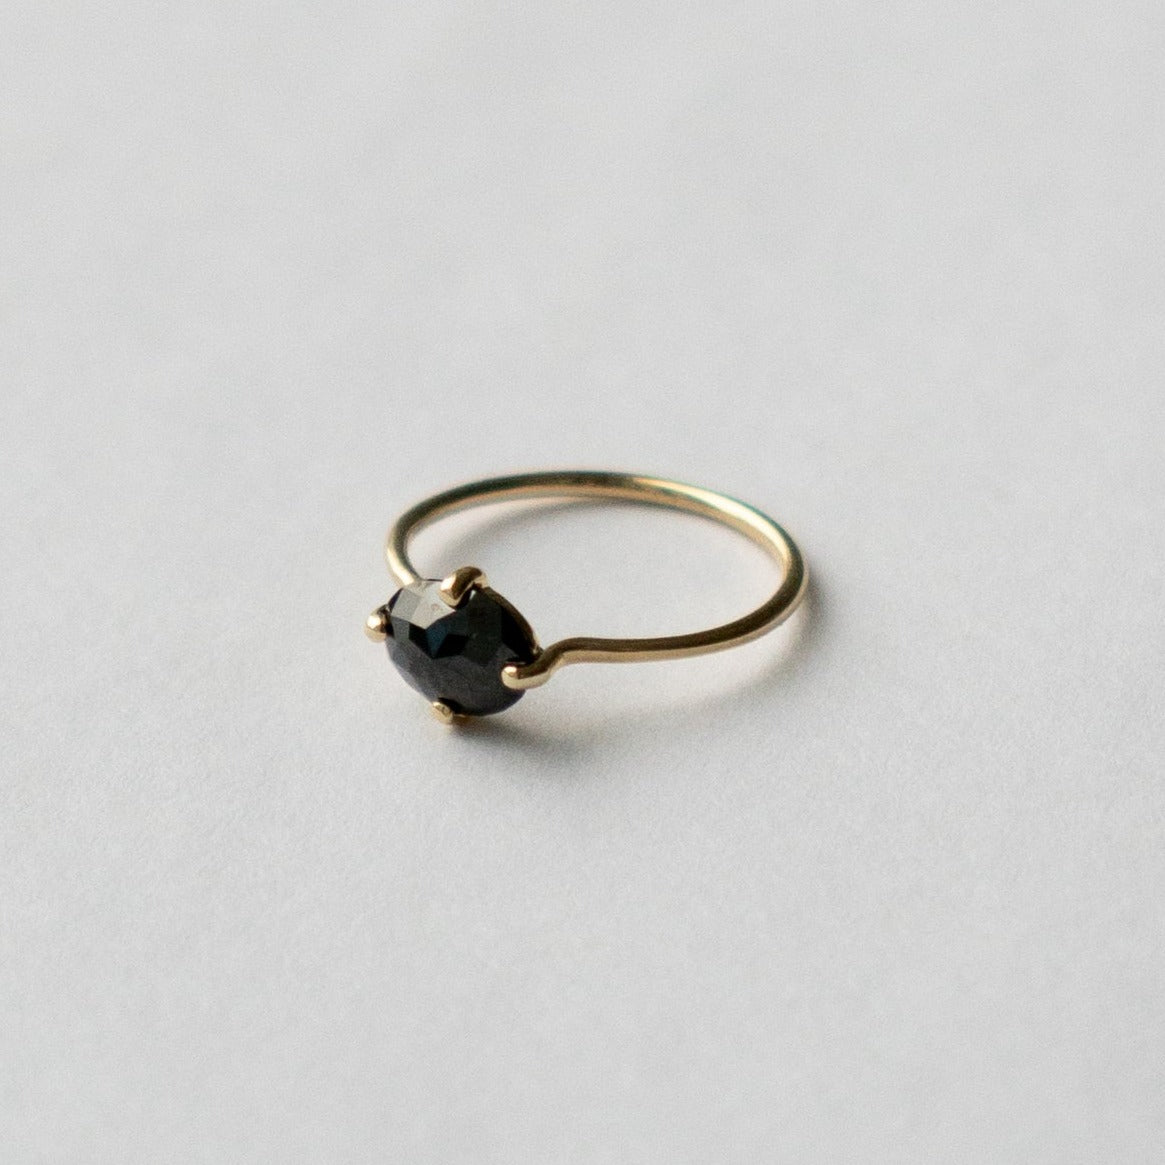 Vera Designer Ring in 14k gold set with a 1.02ct oval rose-cut black diamond by SHW Fine Jewelry New York City